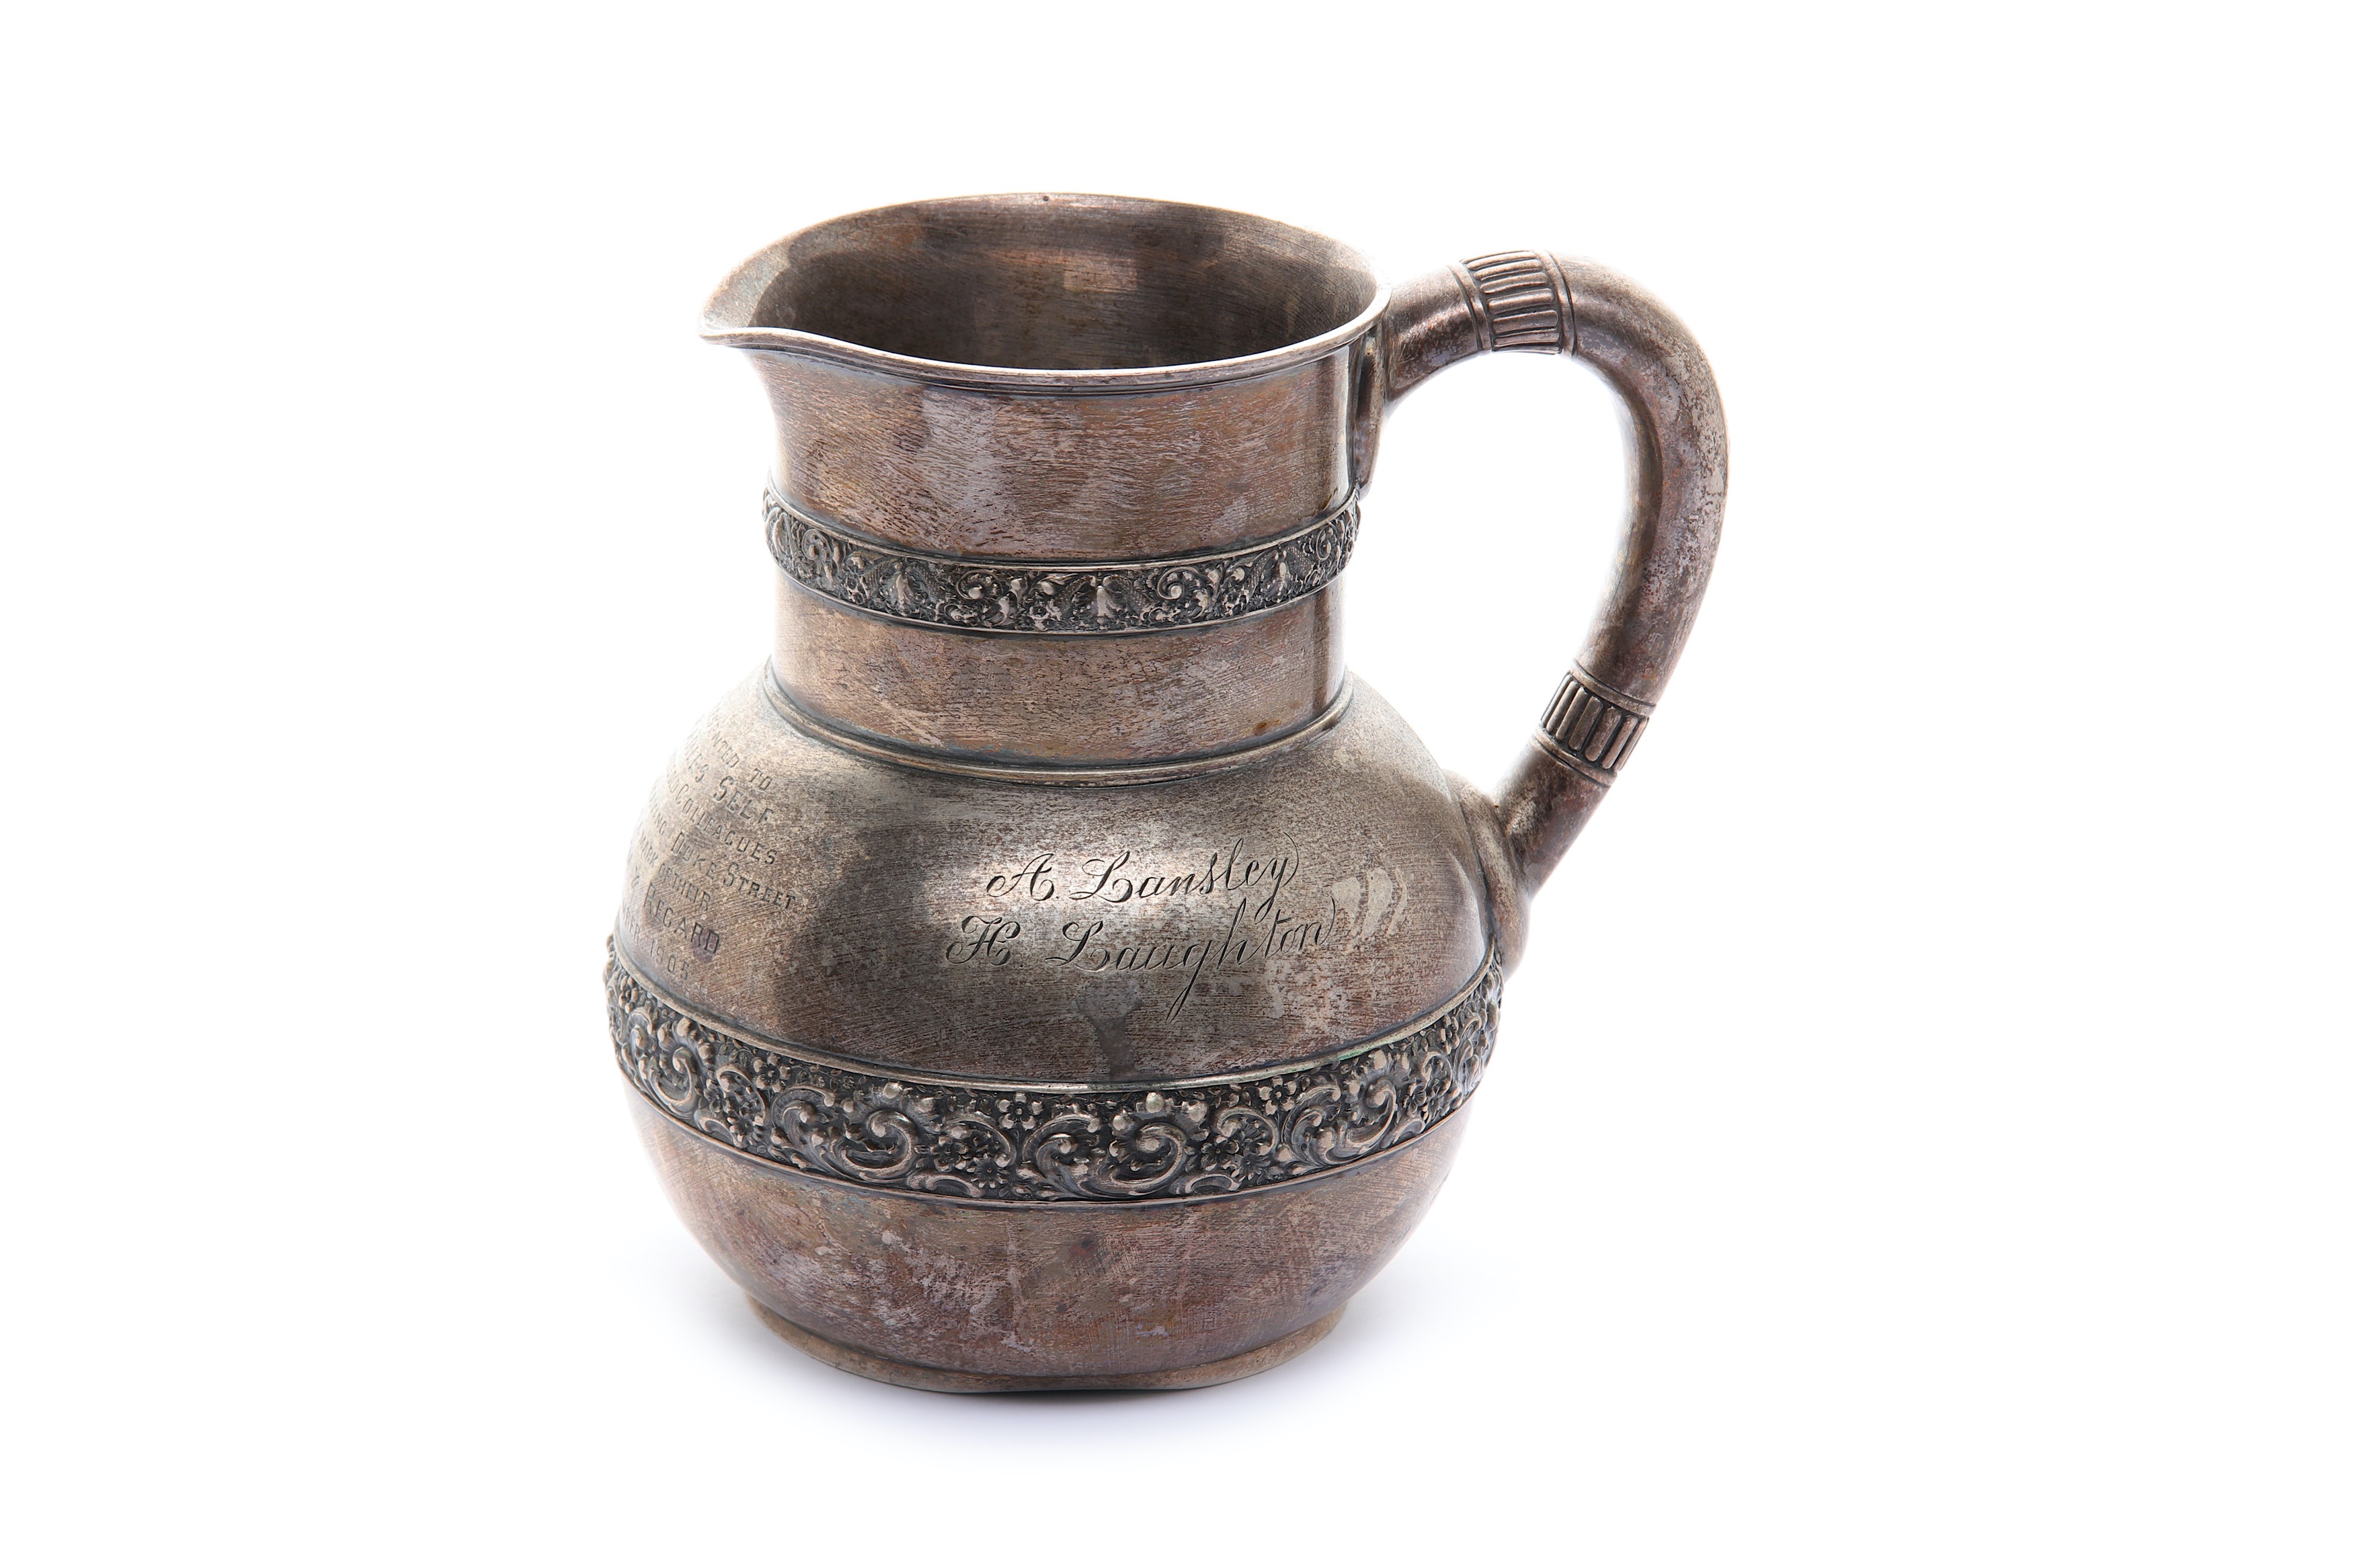 An early 20th century American sterling silver water pitcher by Tiffany